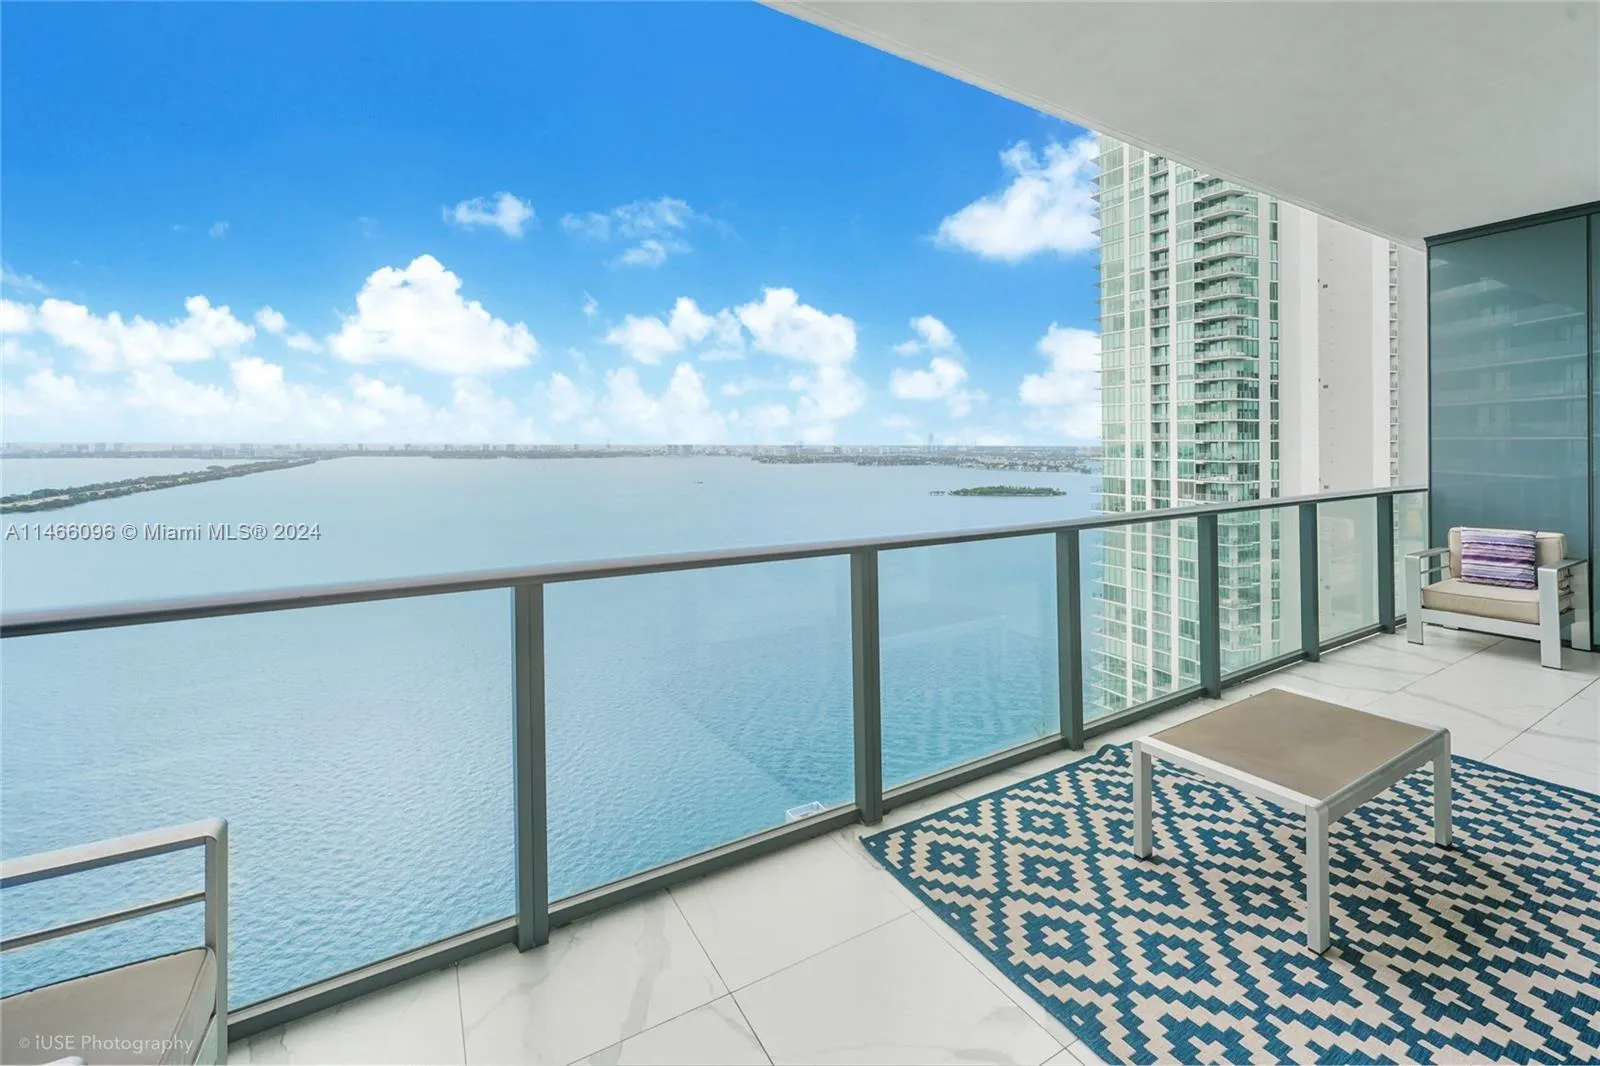 Straight on views of Biscayne Bay with stunning sunrise and evening skyline views.